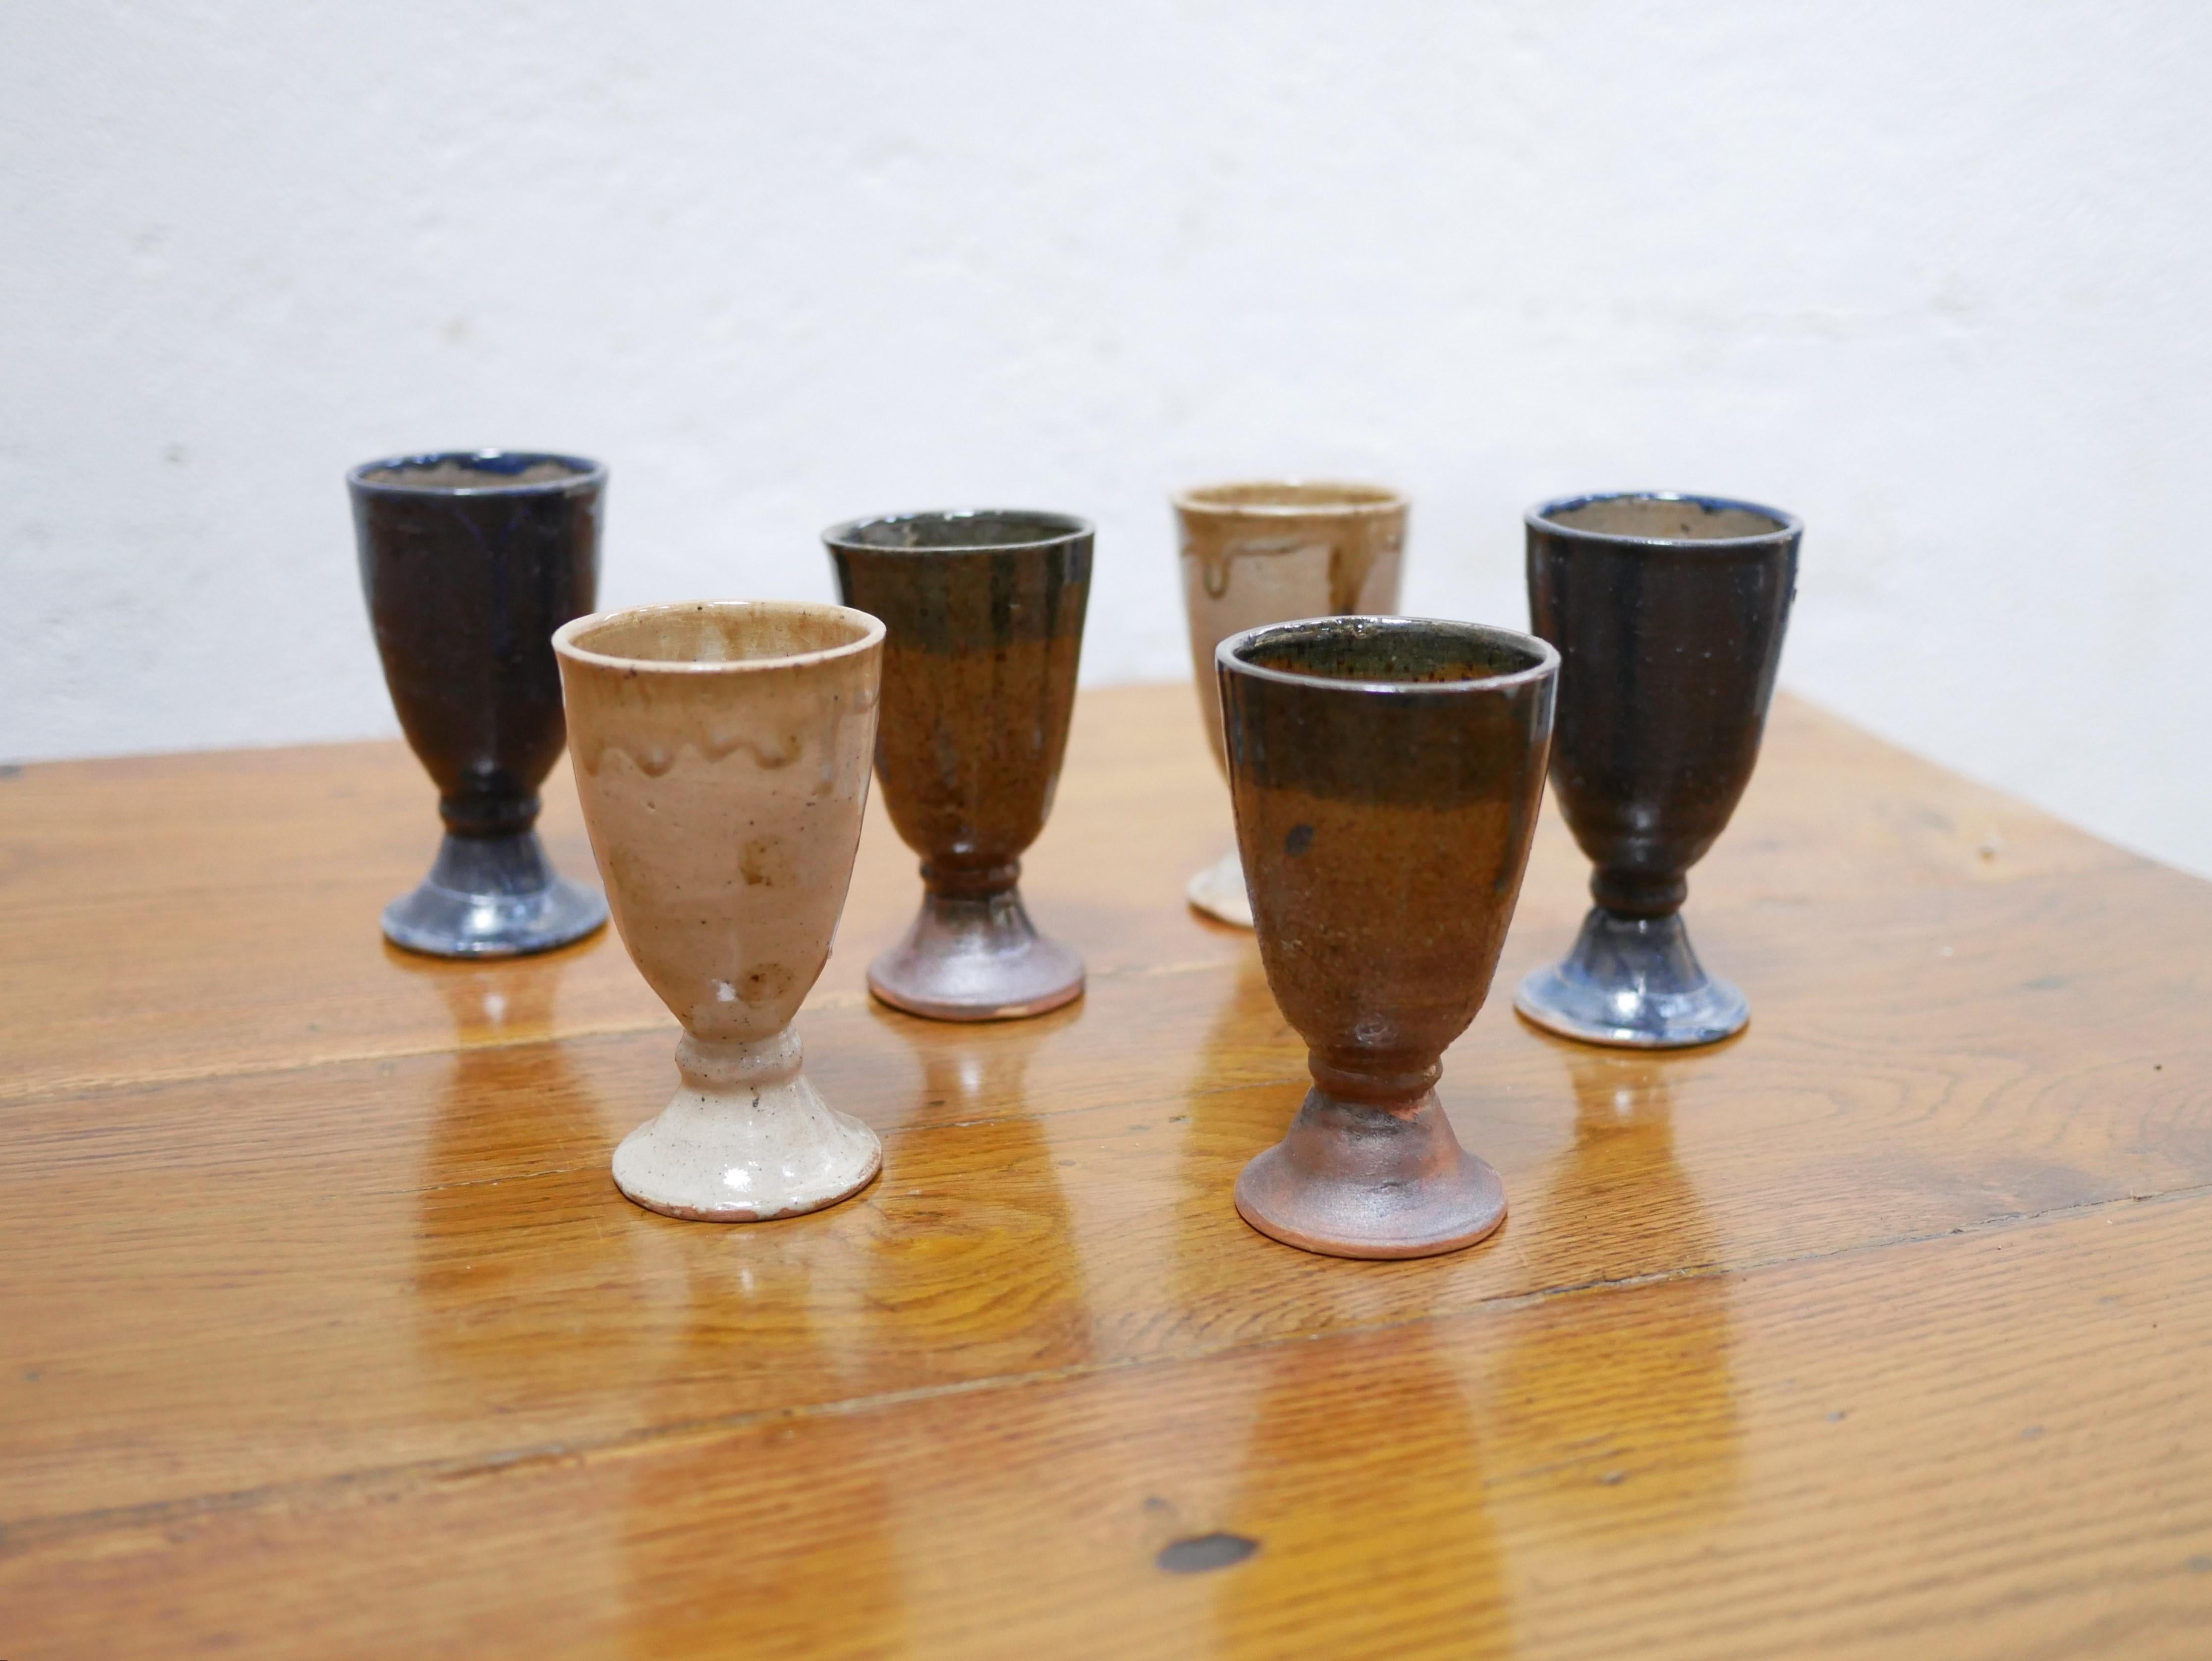 Series of 6 sandstone mazagrans designed by Marius Bernon, La Borne, in the 1930s.

With their modern shape and their pretty color, these ceramics will be perfect in a natural, refined and delicate decoration.

Very good